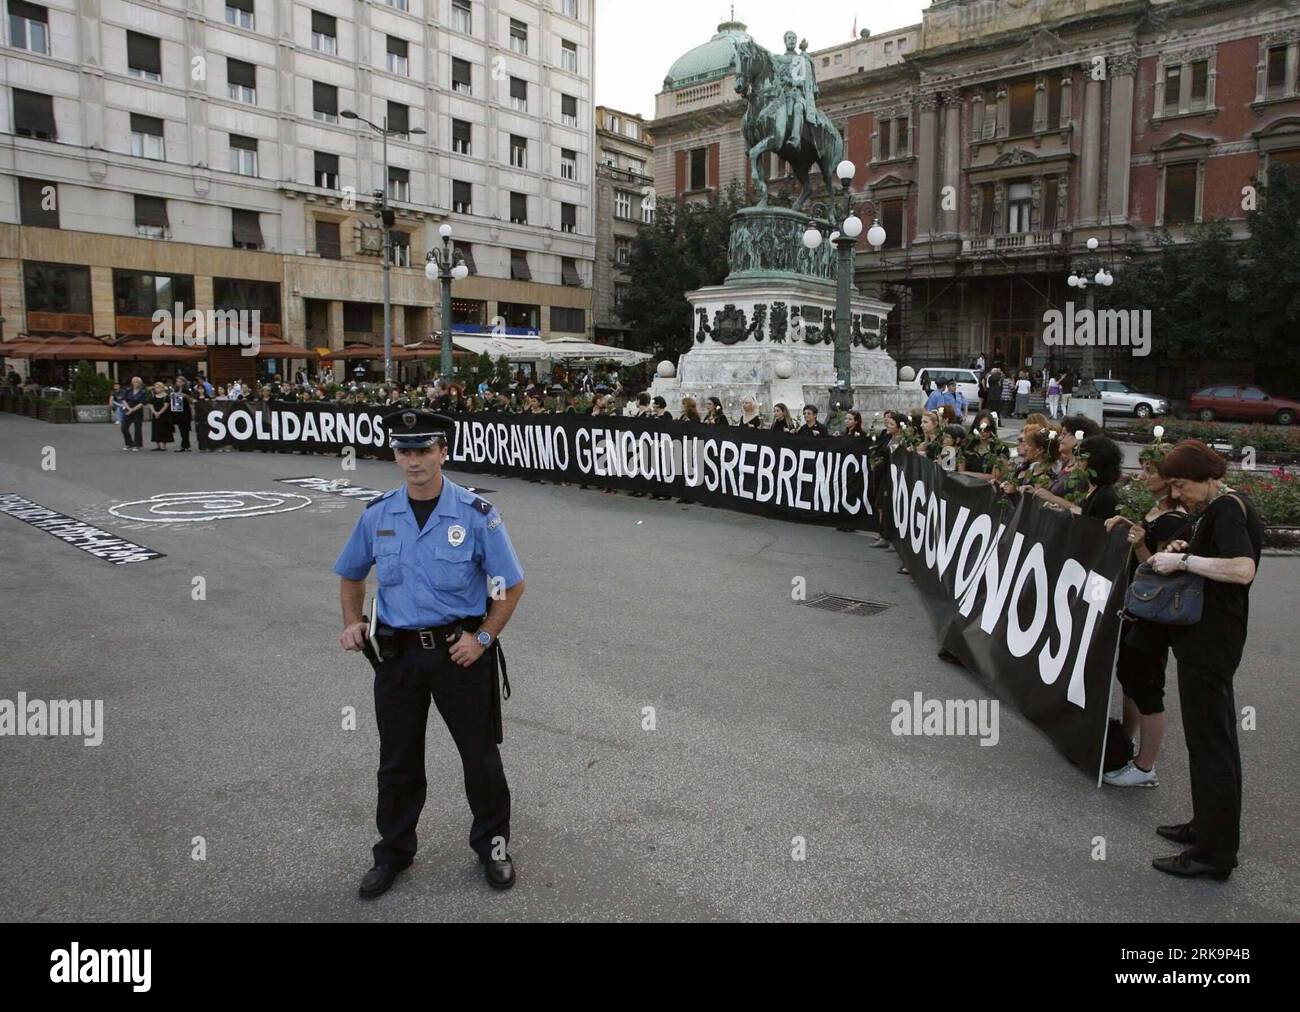 Bildnummer: 54220826  Datum: 10.07.2010  Copyright: imago/Xinhua (100710) -- BELGRADE, July 10, 2010 (Xinhua) -- A policeman stands guard as members of NGO Women in Black attend a protest in Belgrade, Serbia, July 10, 2010, on the eve of the 15th anniversary of the Srebrenica massacre in 1995 to raise public awareness of the war crimes. In July 1995, more than 8,000 Bosnian Muslim men and boys were massacred in Srebrenica by Bosnian Serb forces and a paramilitary unit from Serbia. The Srebrenica massacre is the largest mass murder in Europe since World War II. (Xinhua/Beta)(Serbia Out) (zw) (4 Stock Photo